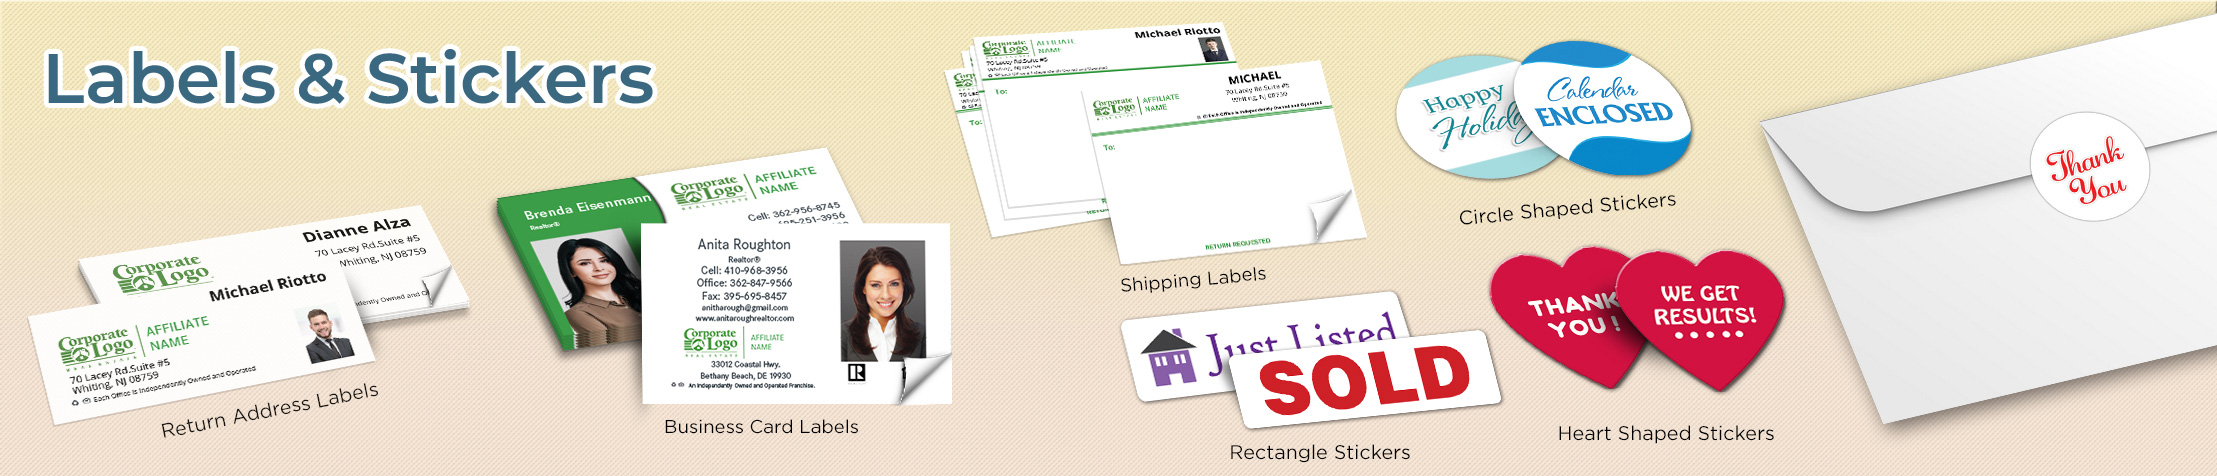 Better Homes and Gardens Real Estate Labels and Stickers - BHGRE business card labels, return address labels, shipping labels, and assorted stickers | BestPrintBuy.com